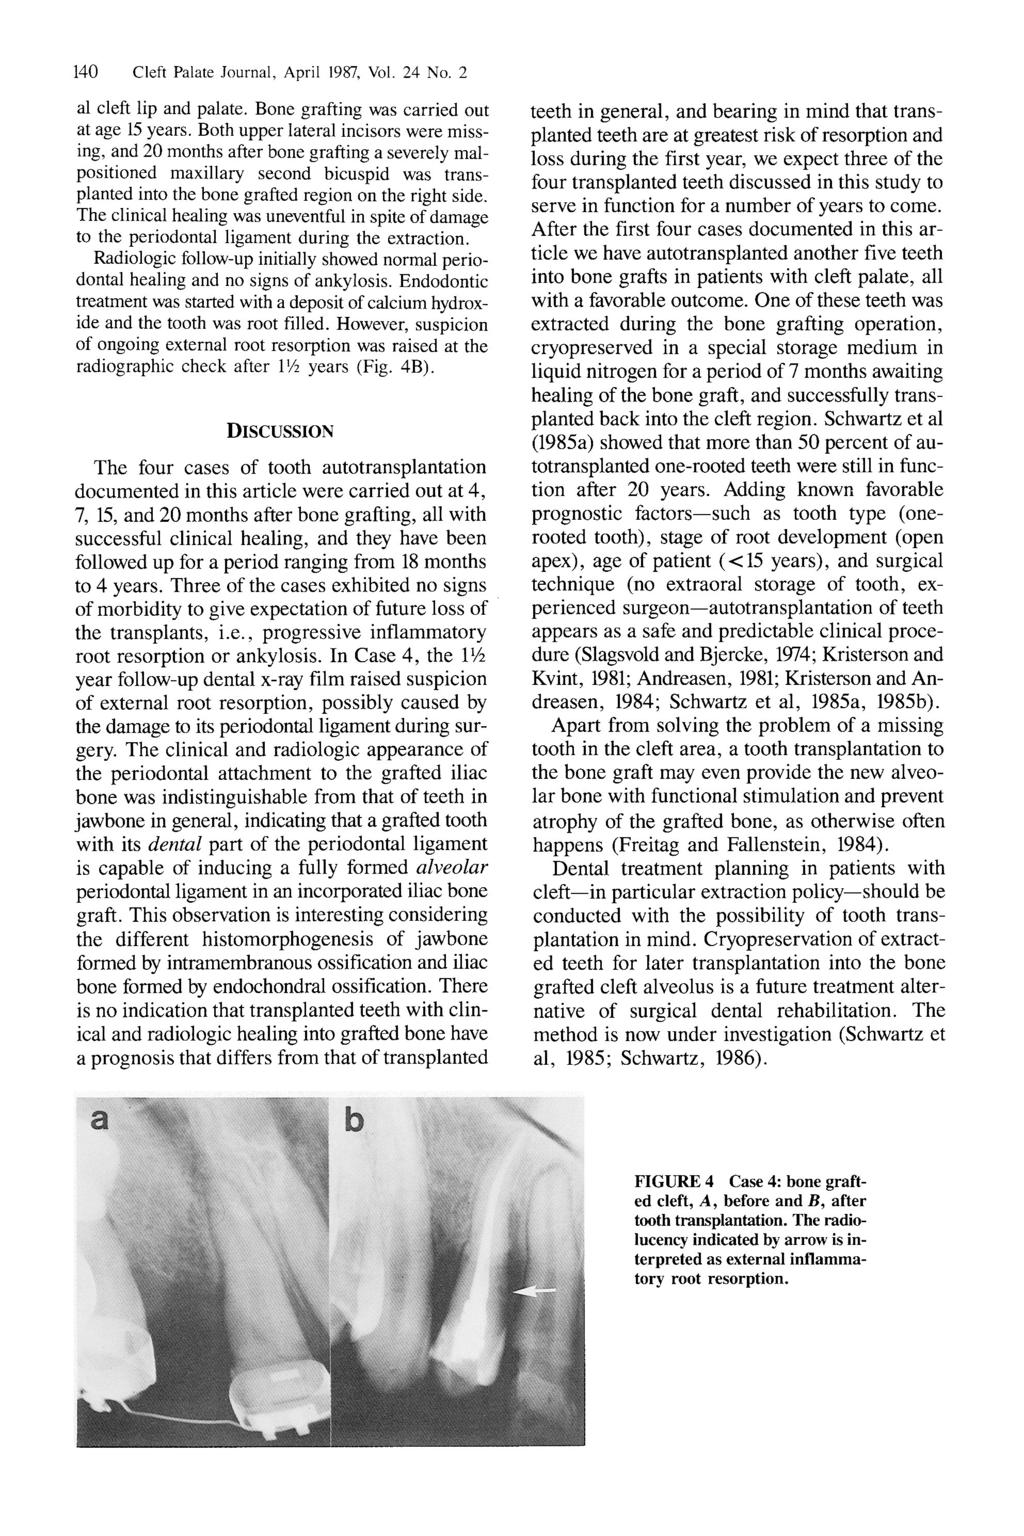 140 Cleft Palate Journal, April 1987, Vol. 24 No. 2 al cleft lip and palate. Bone grafting was carried out at age 15 years.